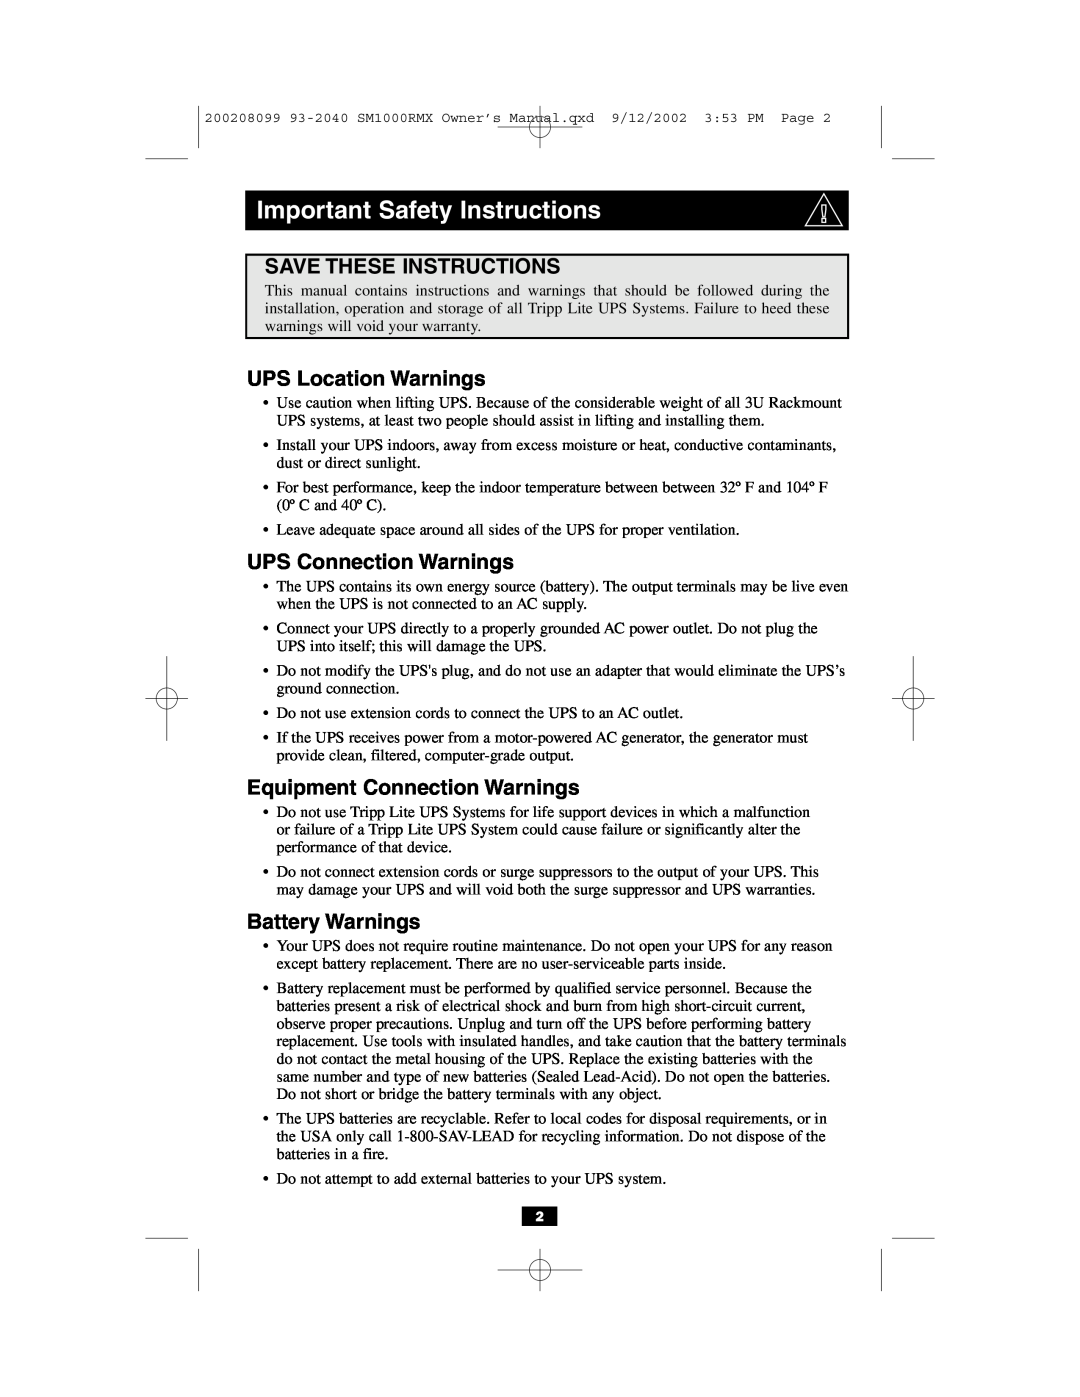 Tripp Lite RMX 1000-2000 VA owner manual Important Safety Instructions, Save These Instructions, UPS Location Warnings 